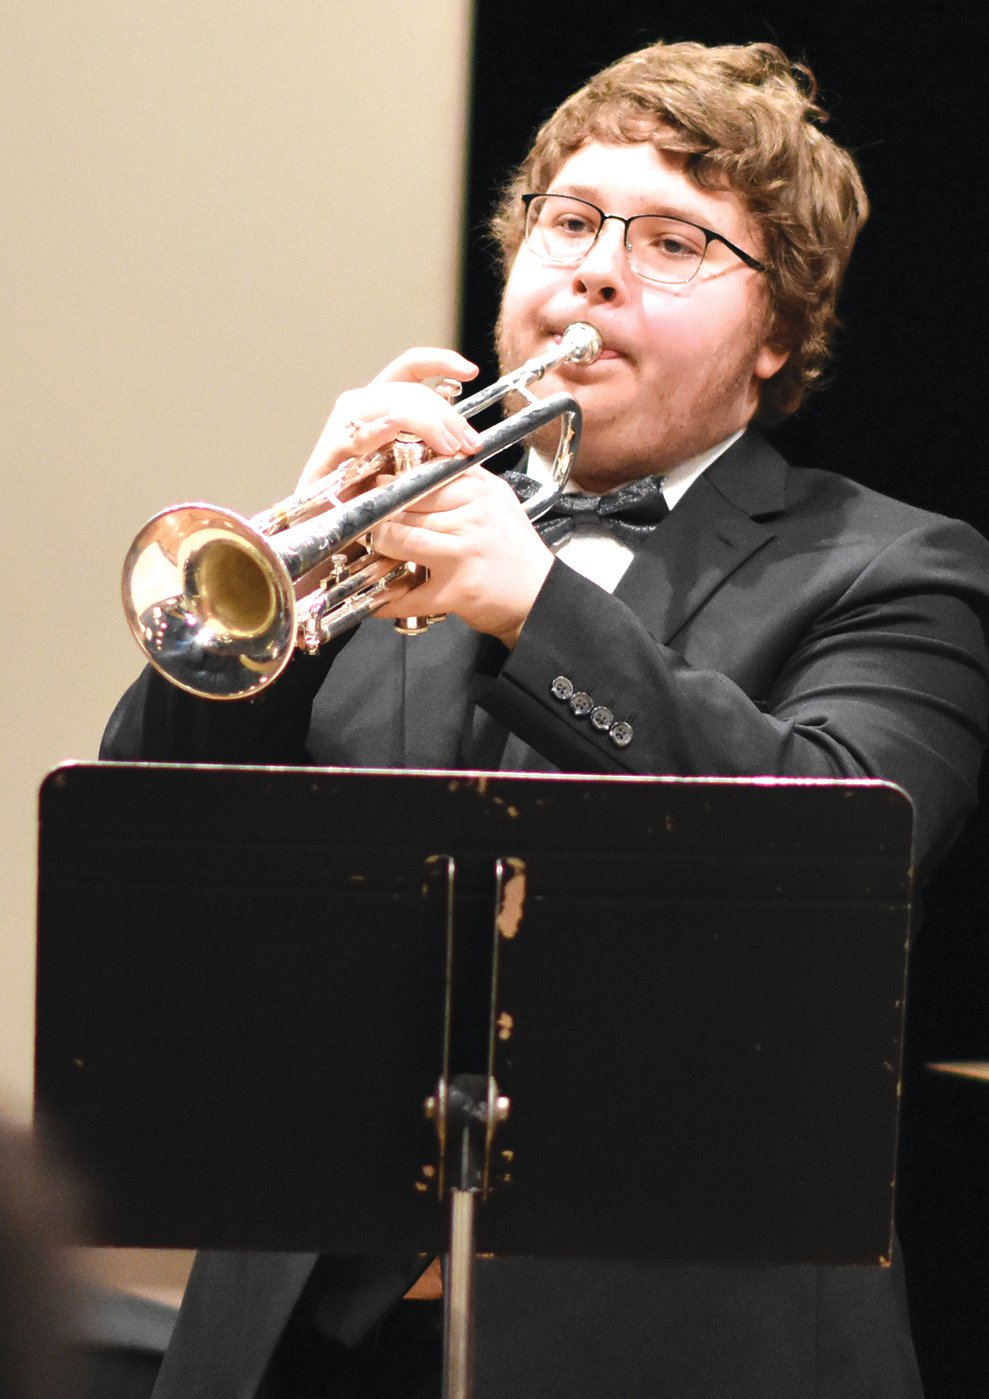 Colyn Seeley, RFA student, plays the trumpet (Teacher Jacob Meiss).